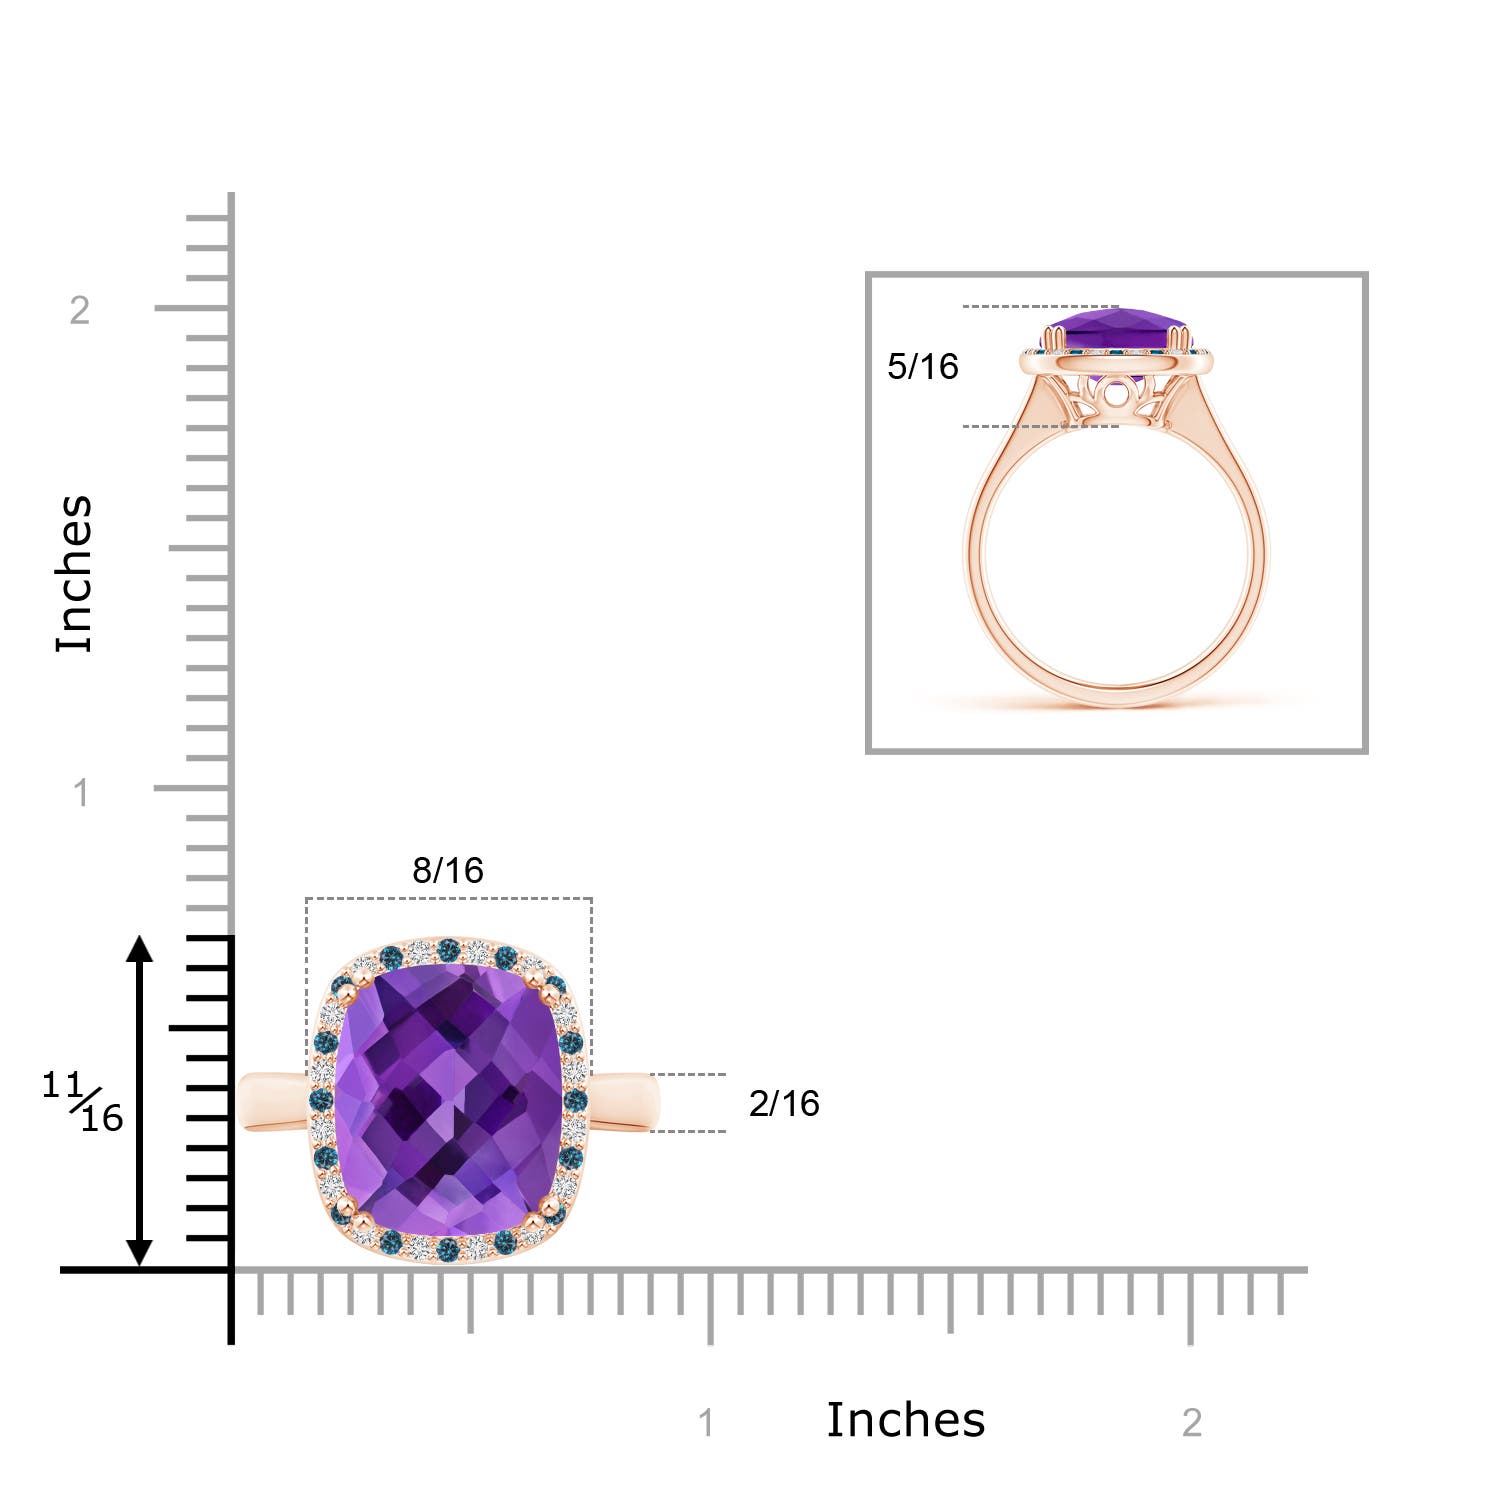 AAA - Amethyst / 6.27 CT / 14 KT Rose Gold